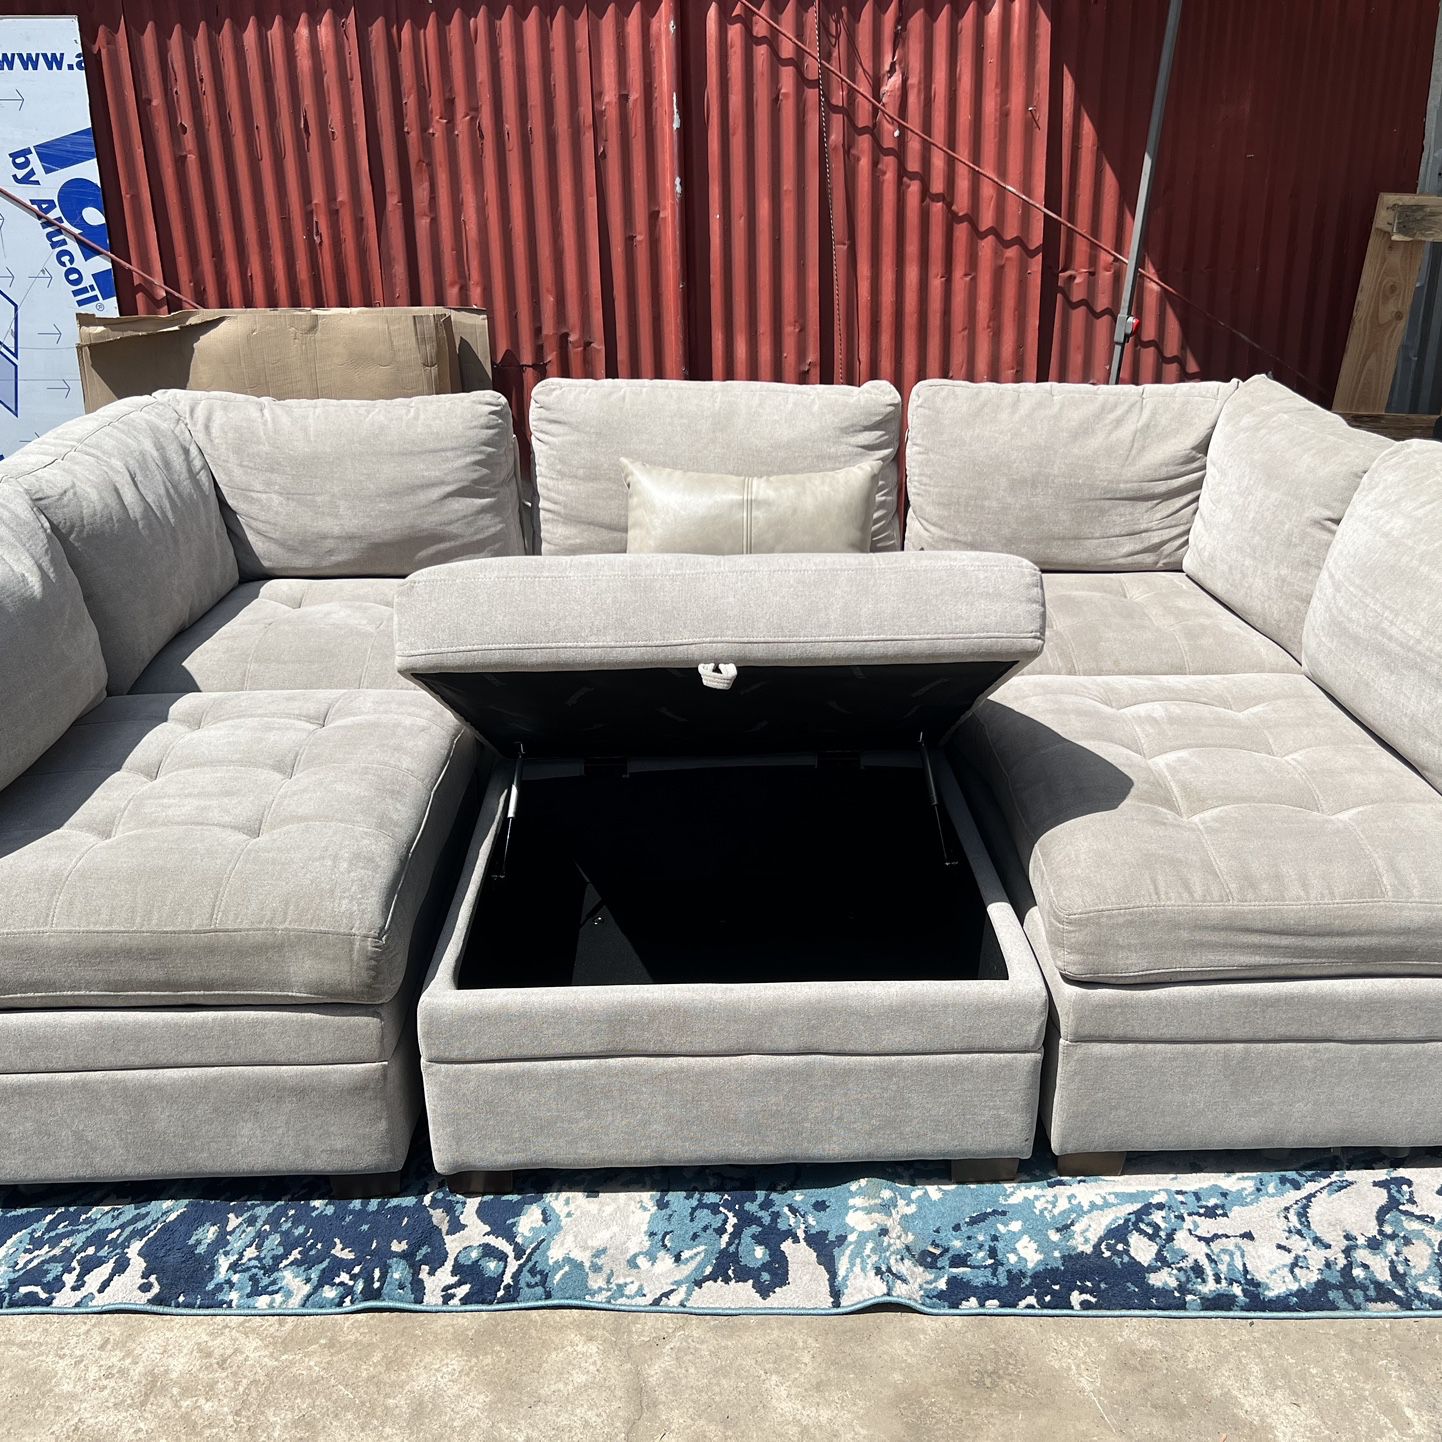 6 Piece Fabric Sectional  with Ottoman Storage